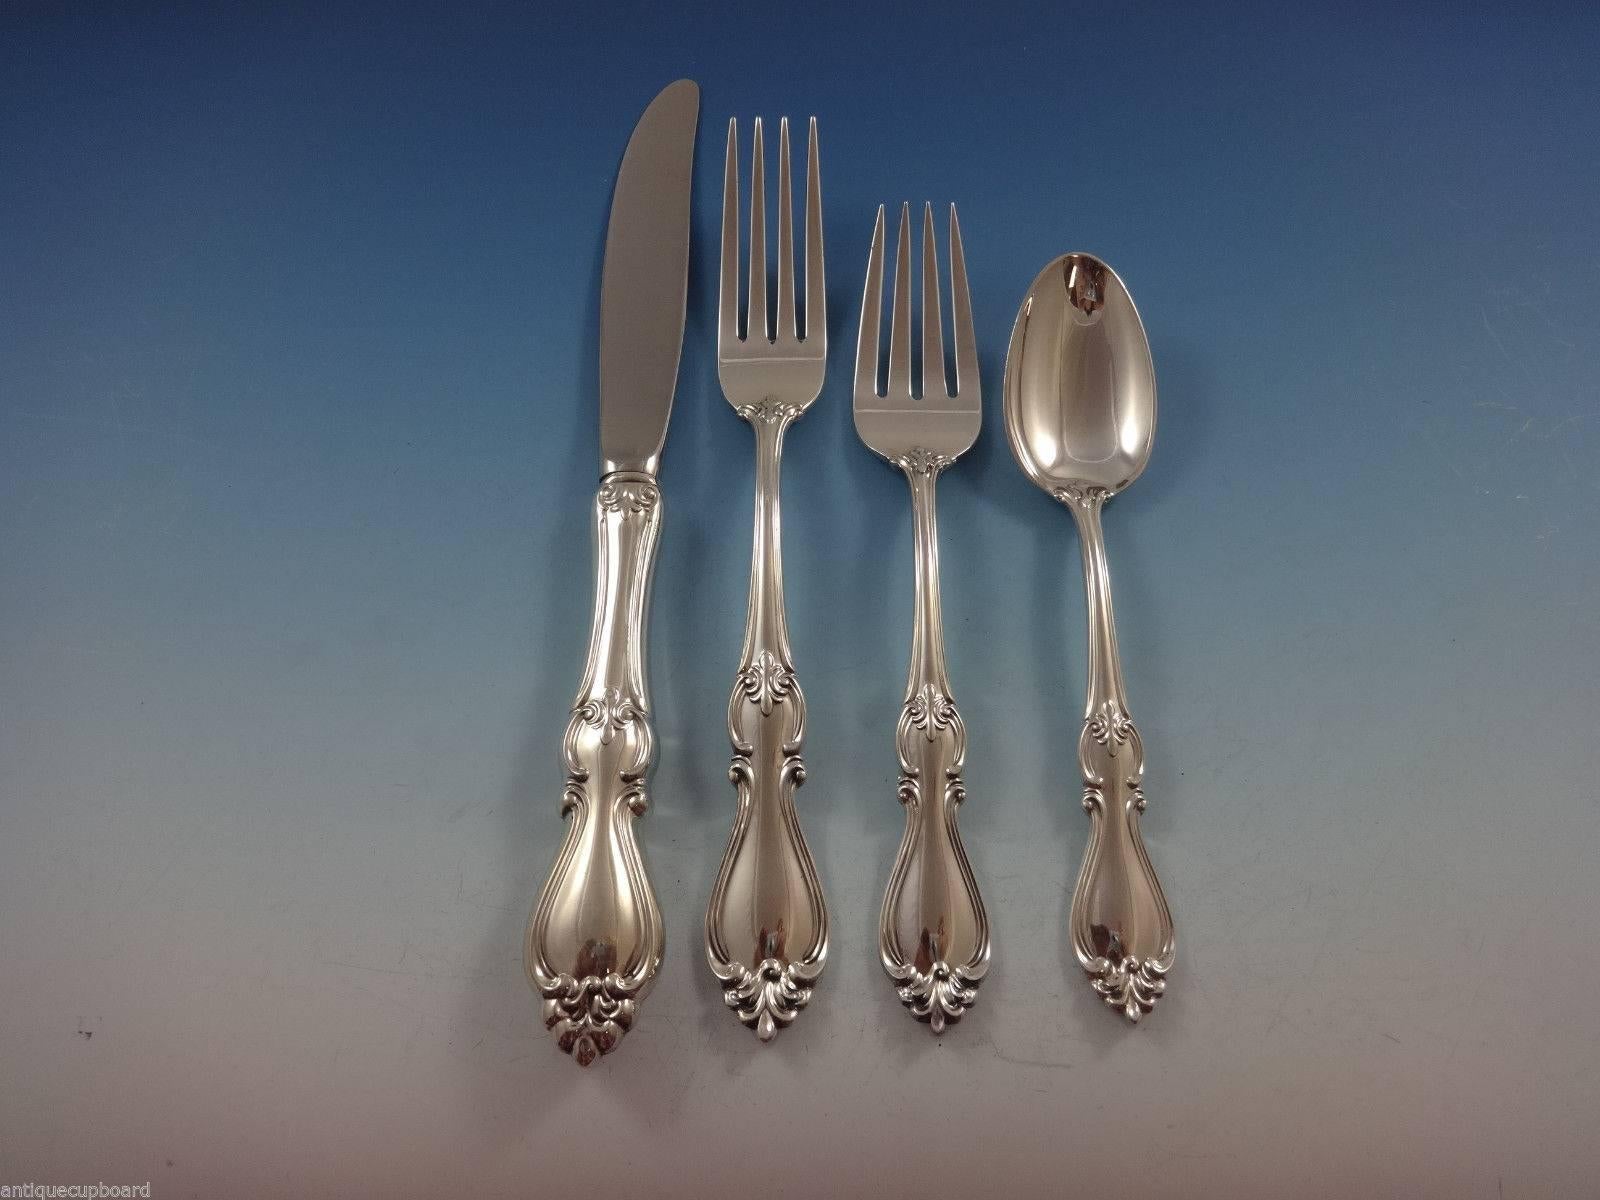 Beautiful Queen Elizabeth I by Towle sterling silver flatware set of 32 pieces. This set includes:

Eight knives, 8 7/8